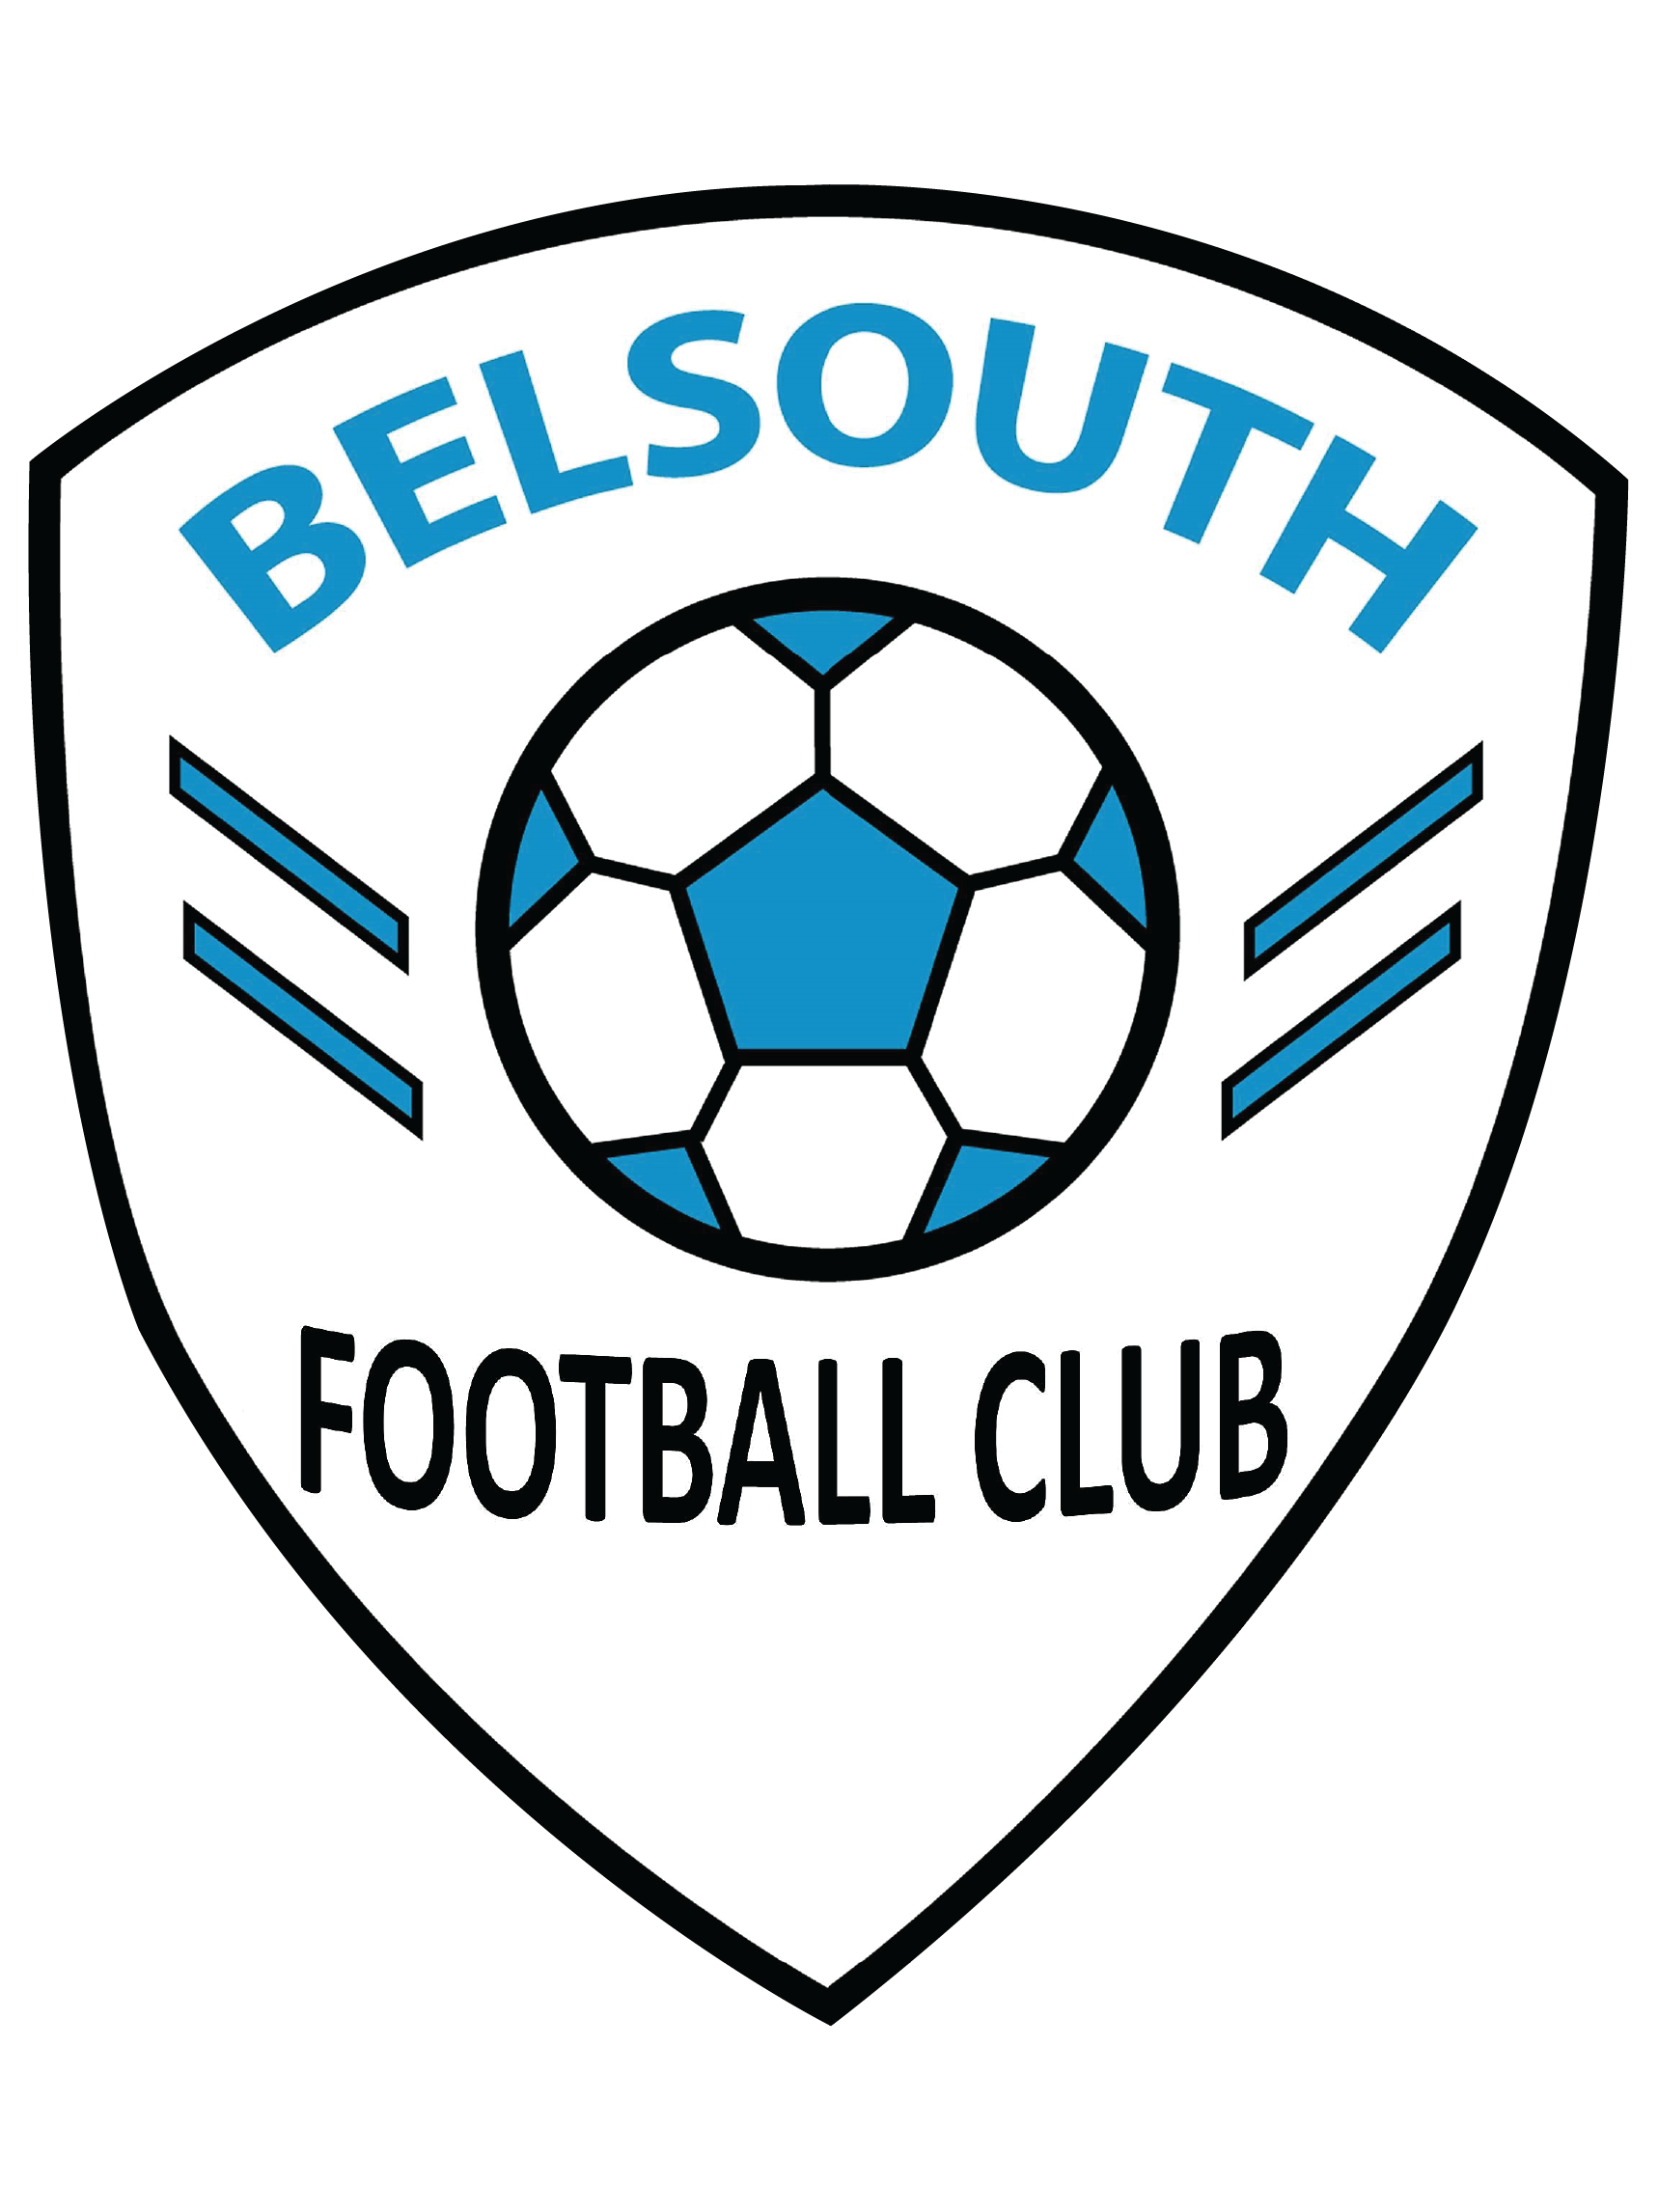 belsouthmerchandise.square.site